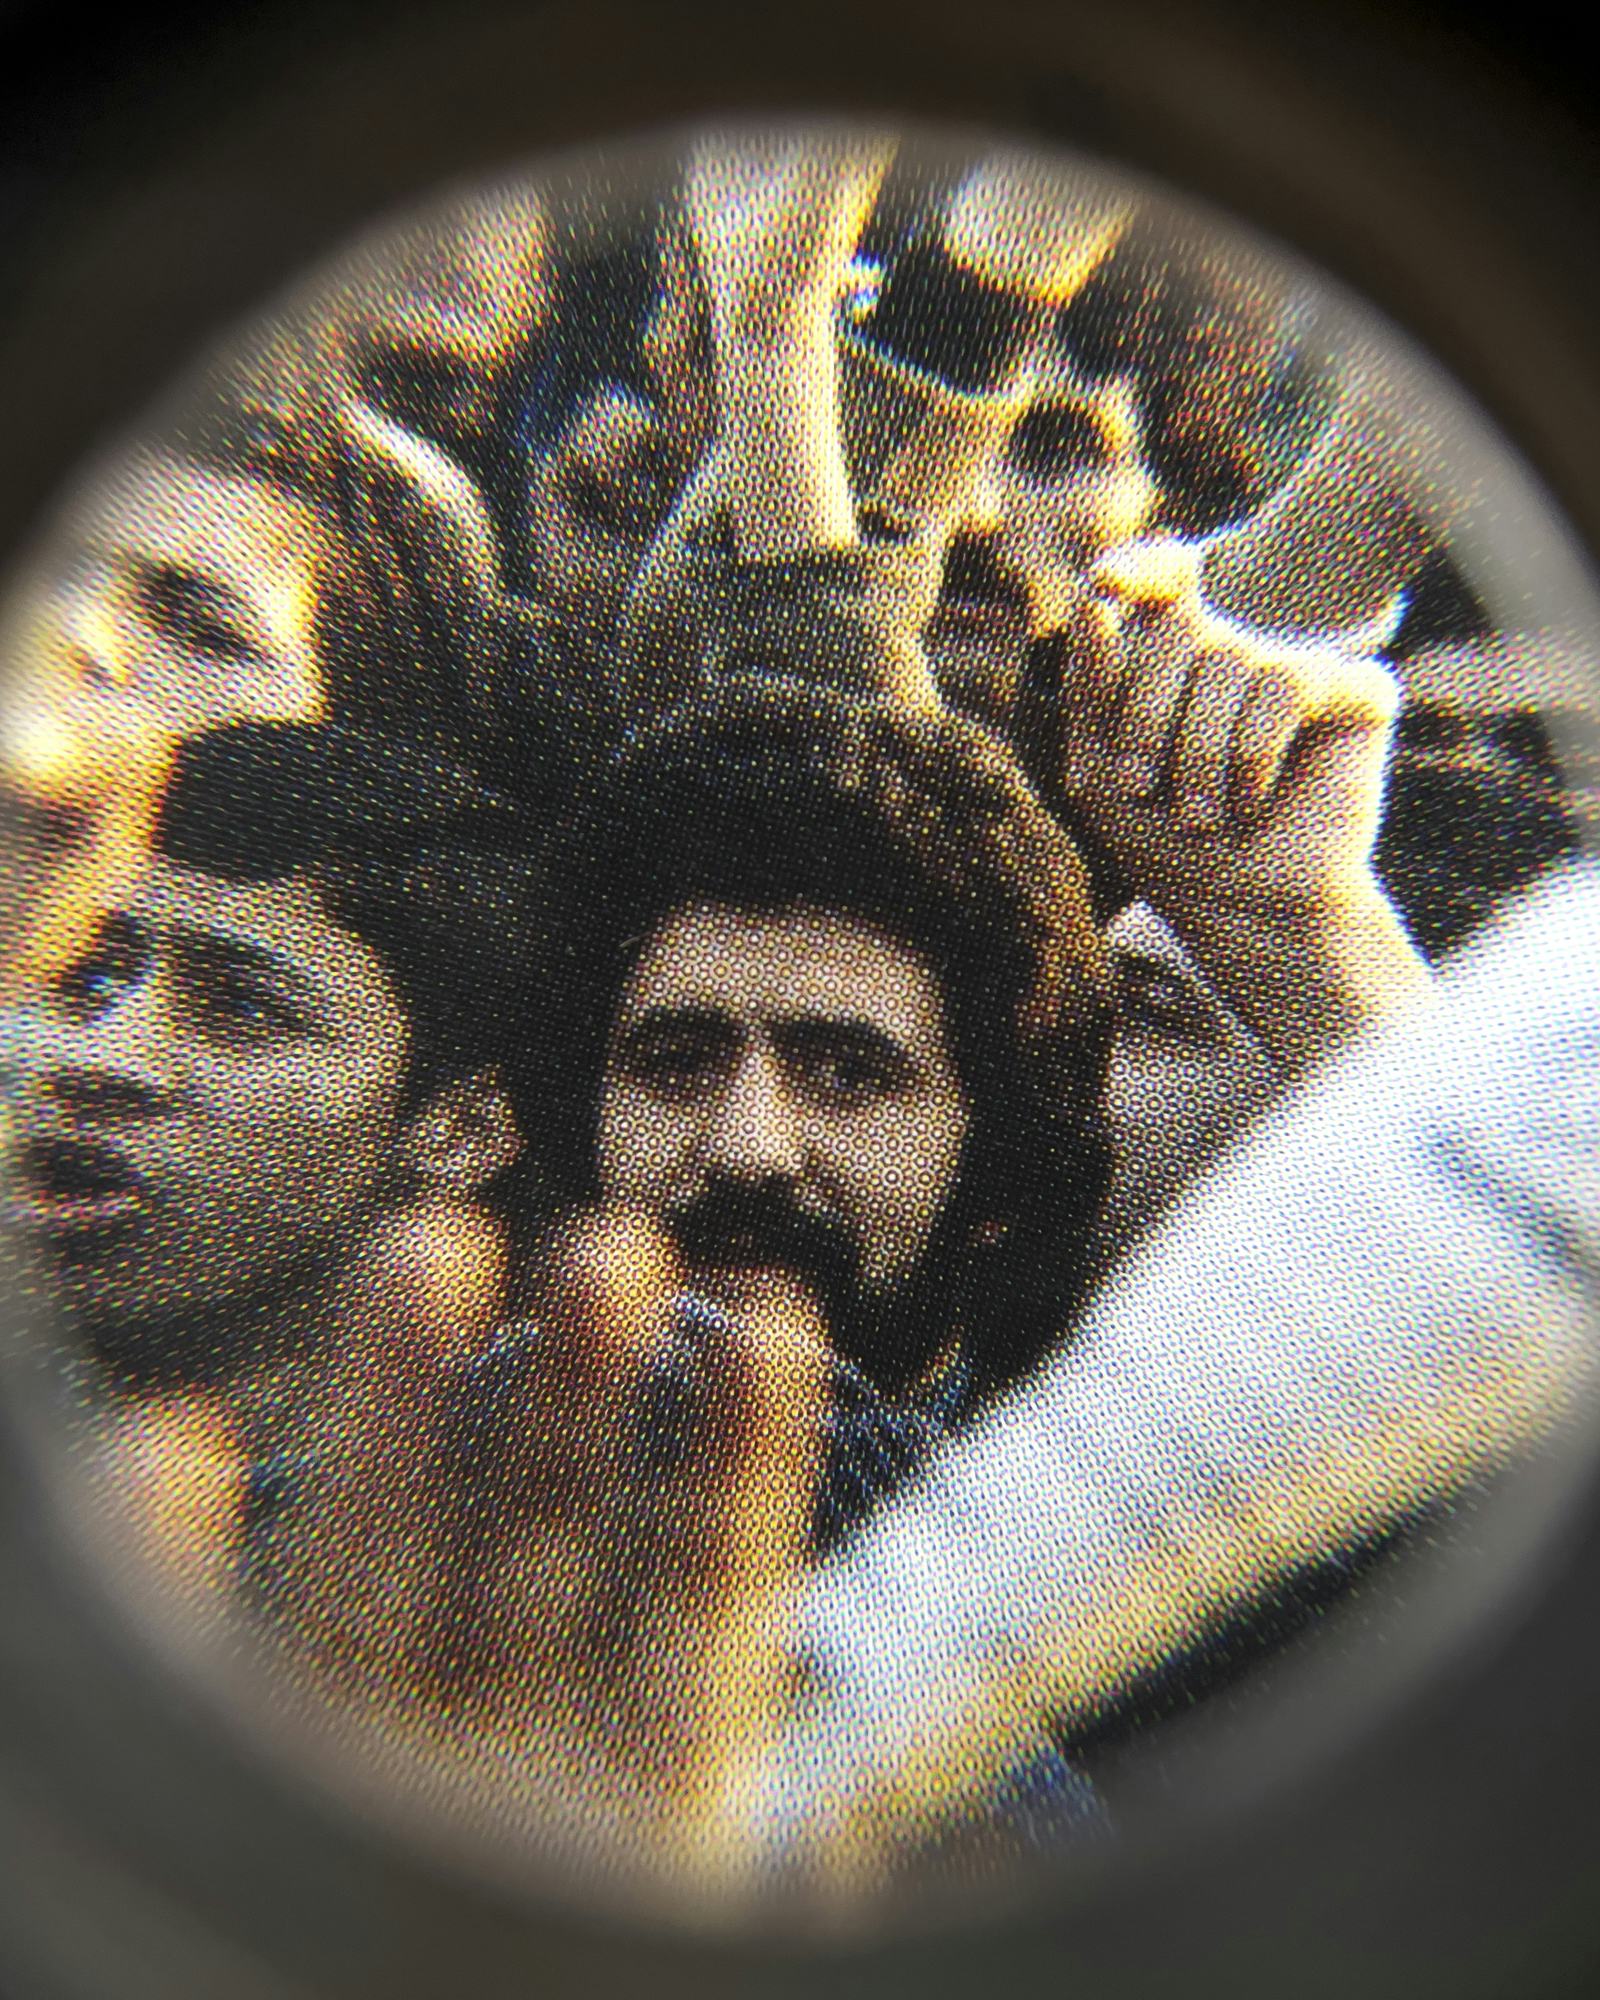 Coloured close-up image of an existing photograph, showing a man in the middle of a protesting crowd staring into the camera. Shot through a magnifying lens © Amin Yousefi